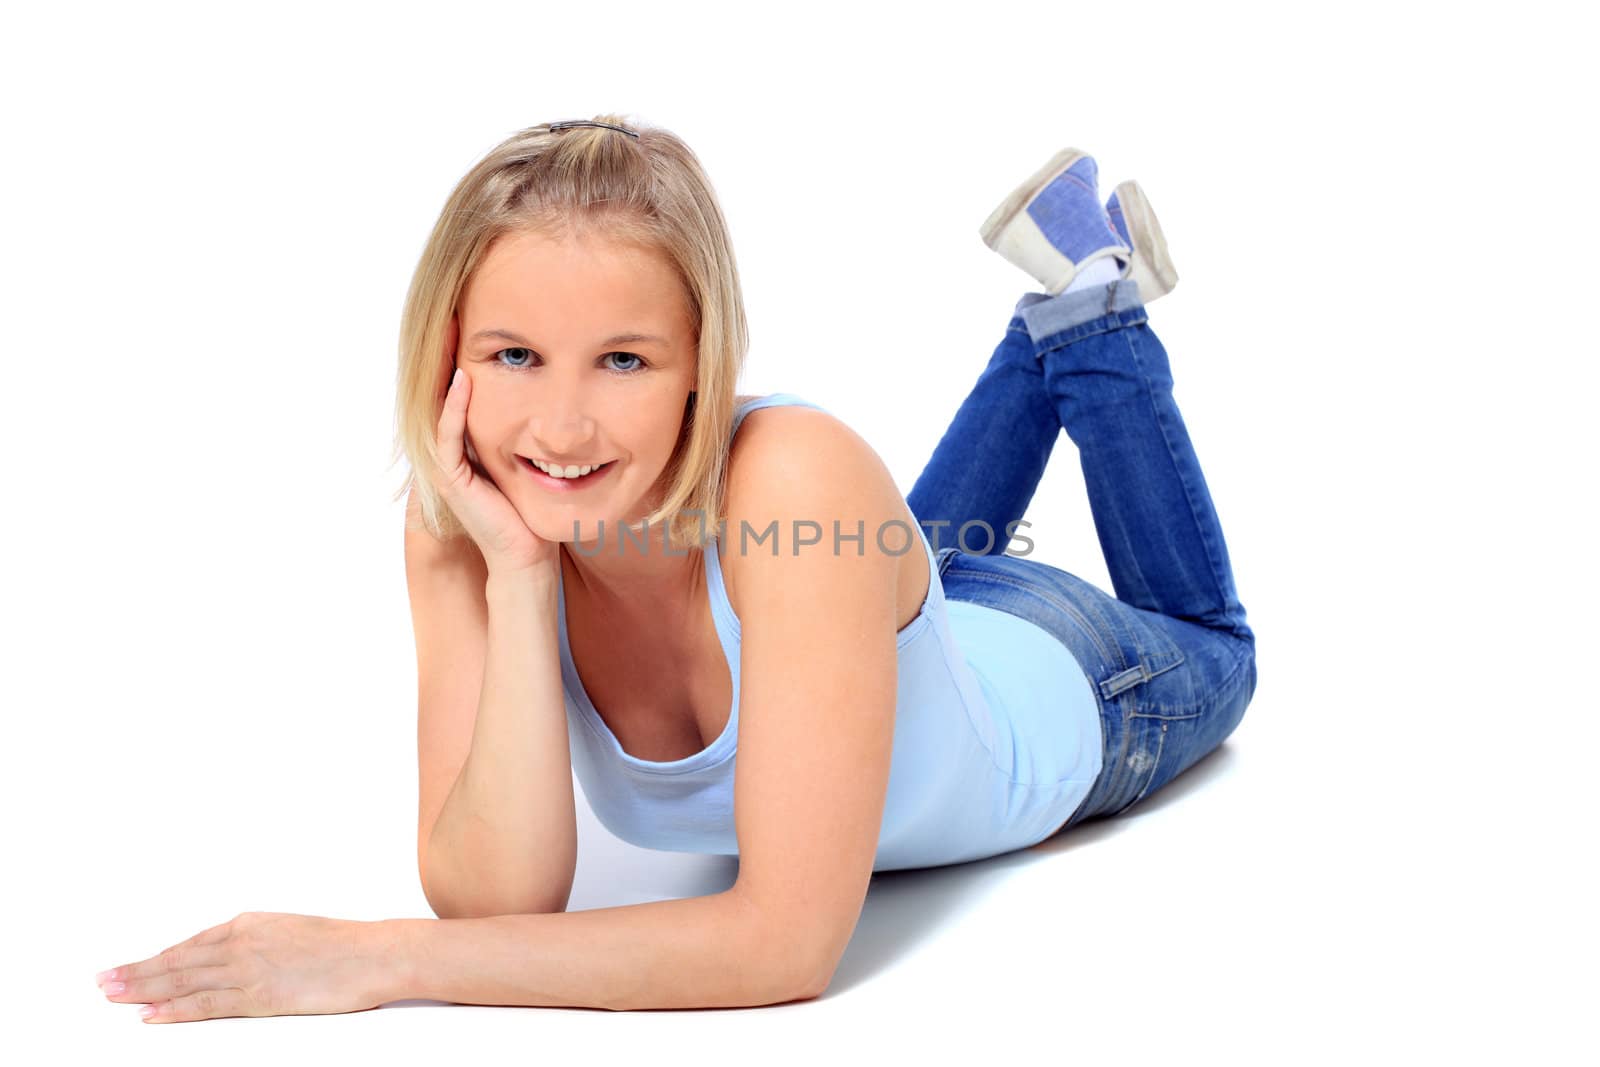 Attractive young scandinavian woman lying on the floor. All on white background.